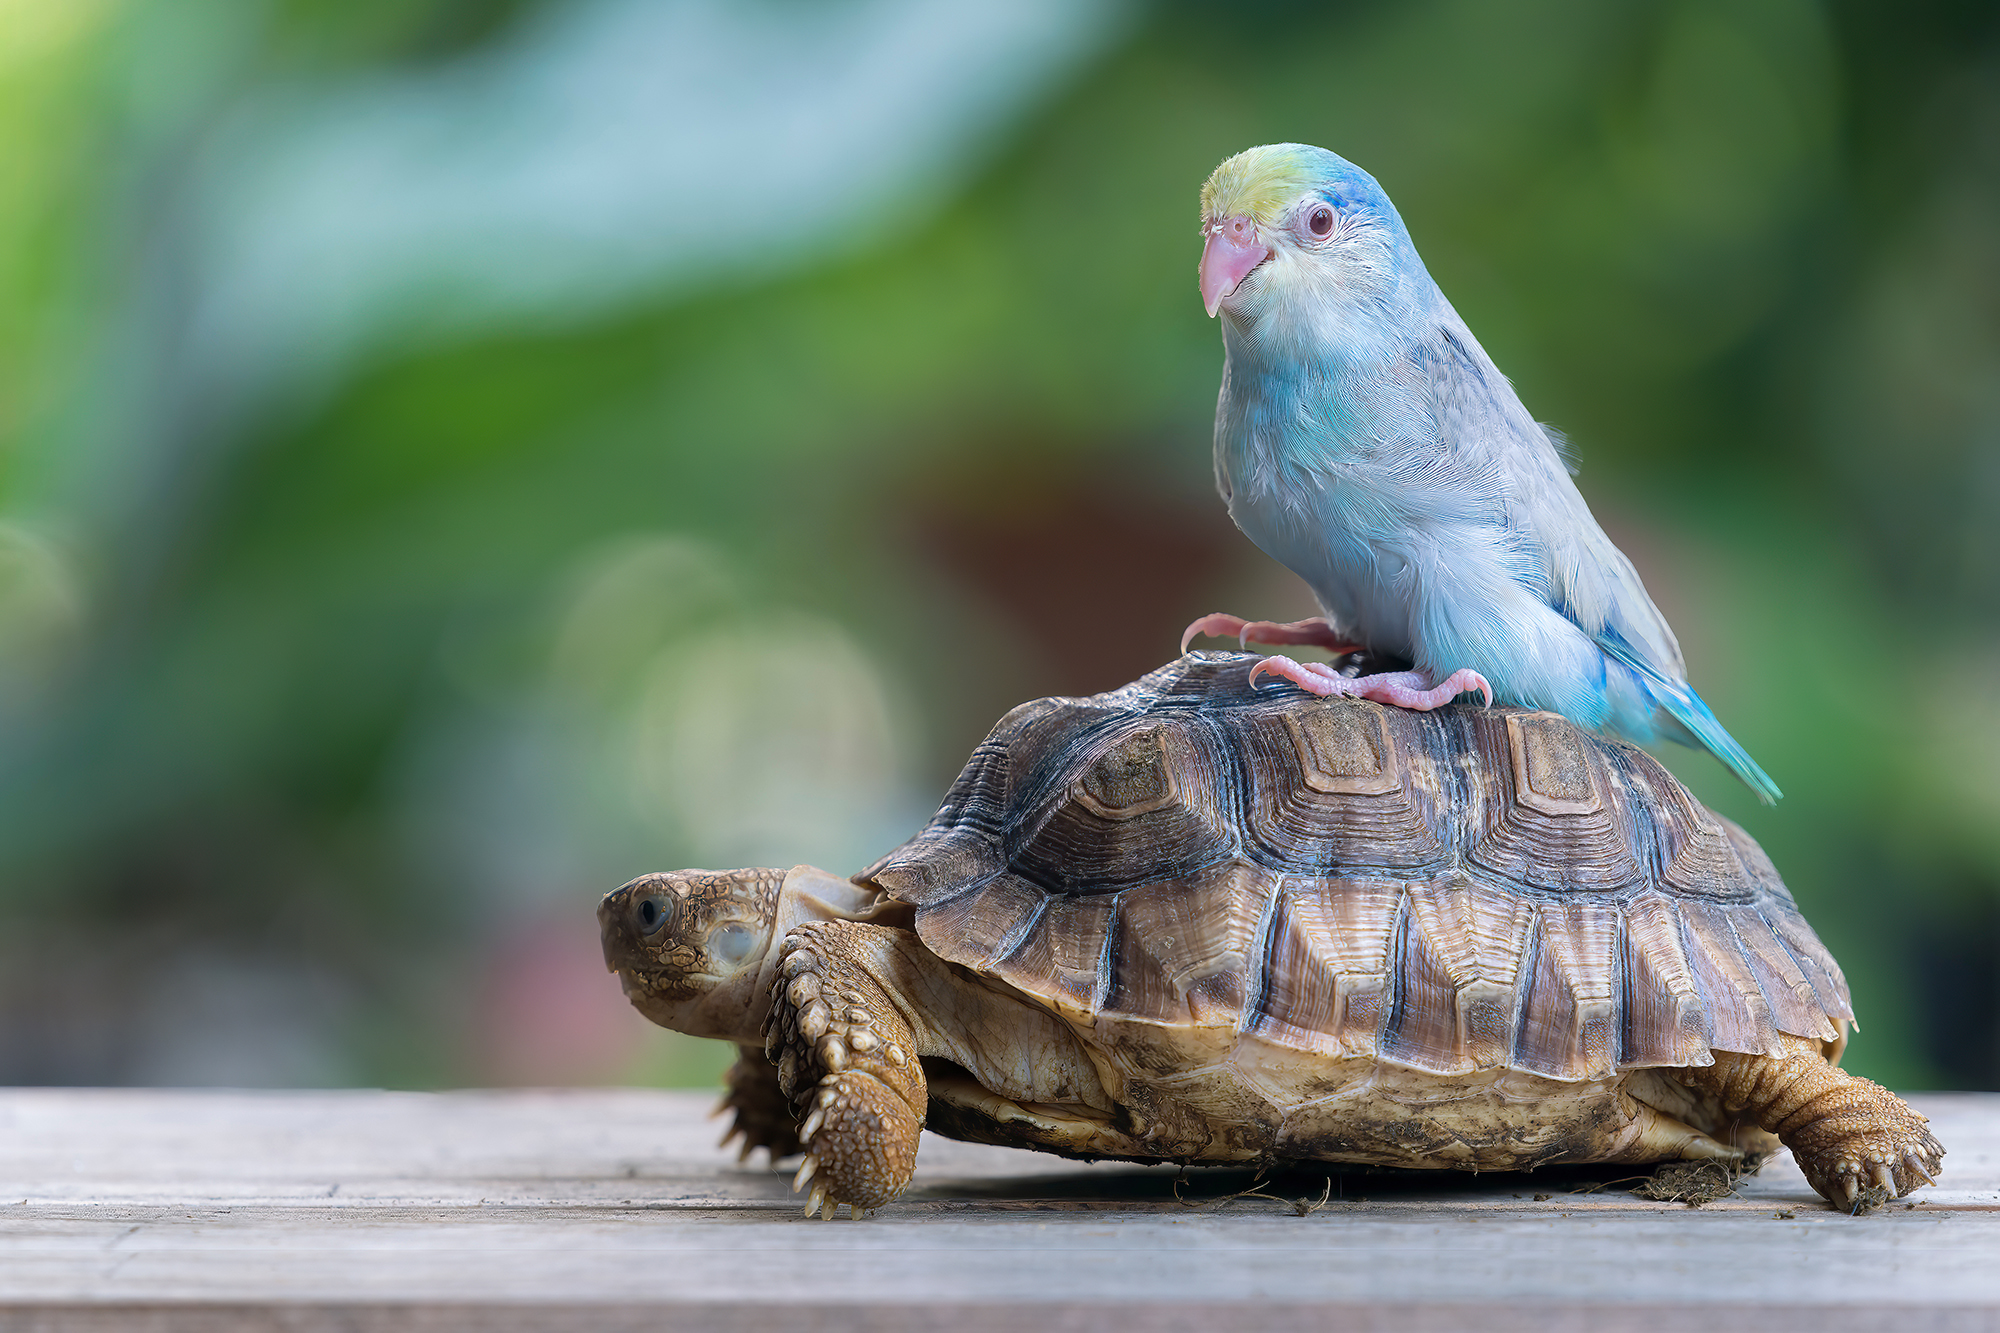 Image of a blue and green parakeet sitting on top of a brown tortoise.